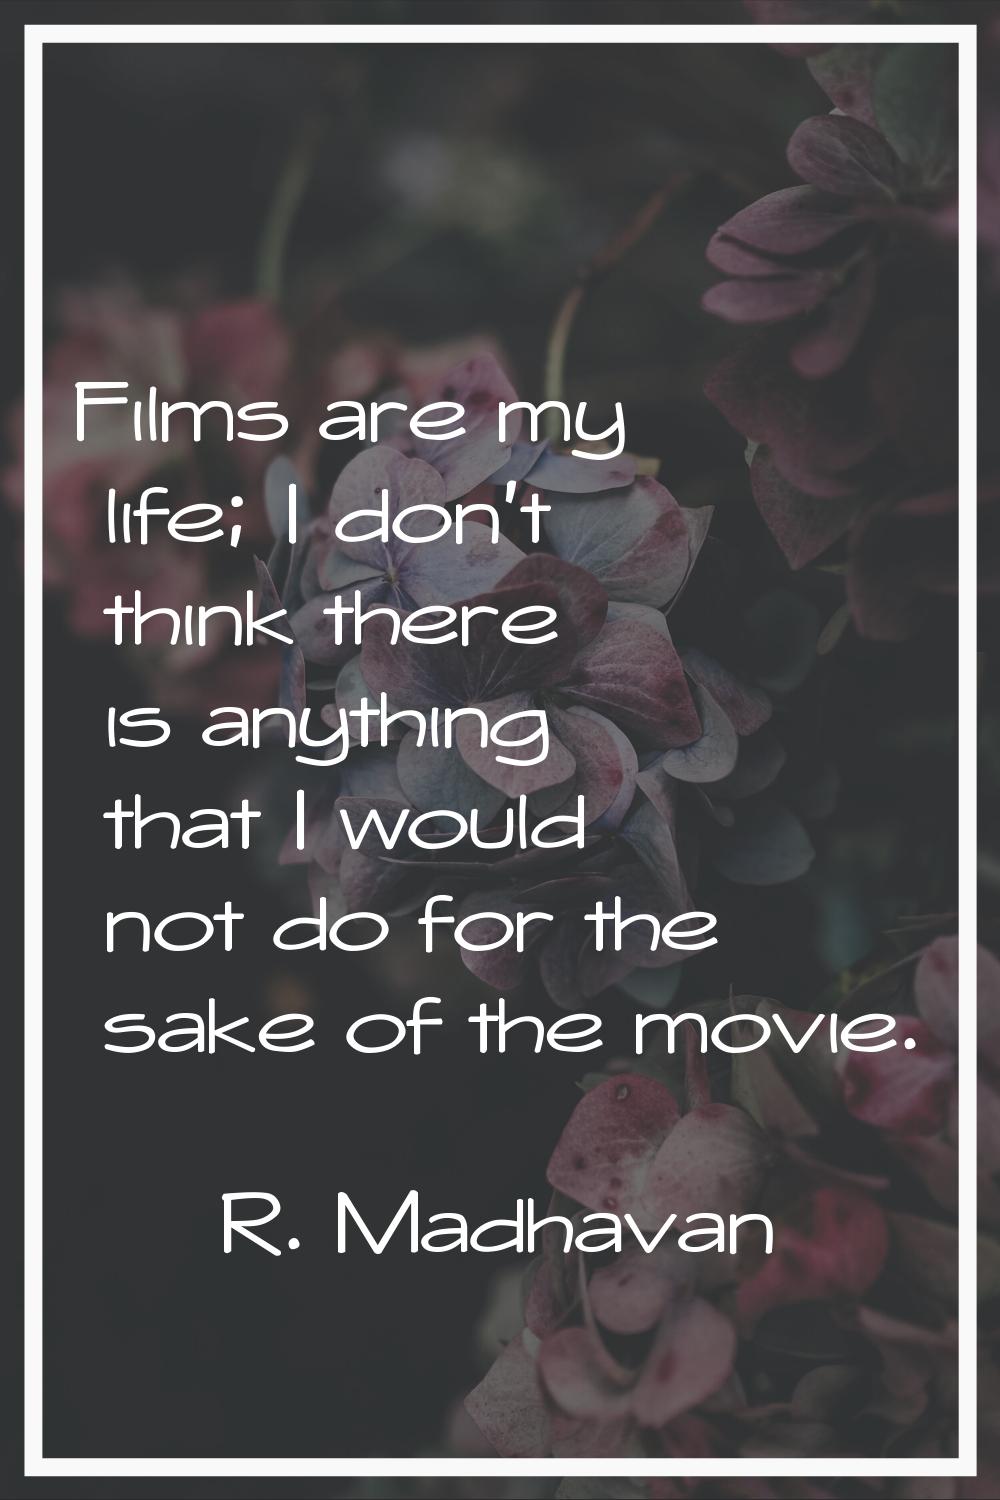 Films are my life; I don't think there is anything that I would not do for the sake of the movie.